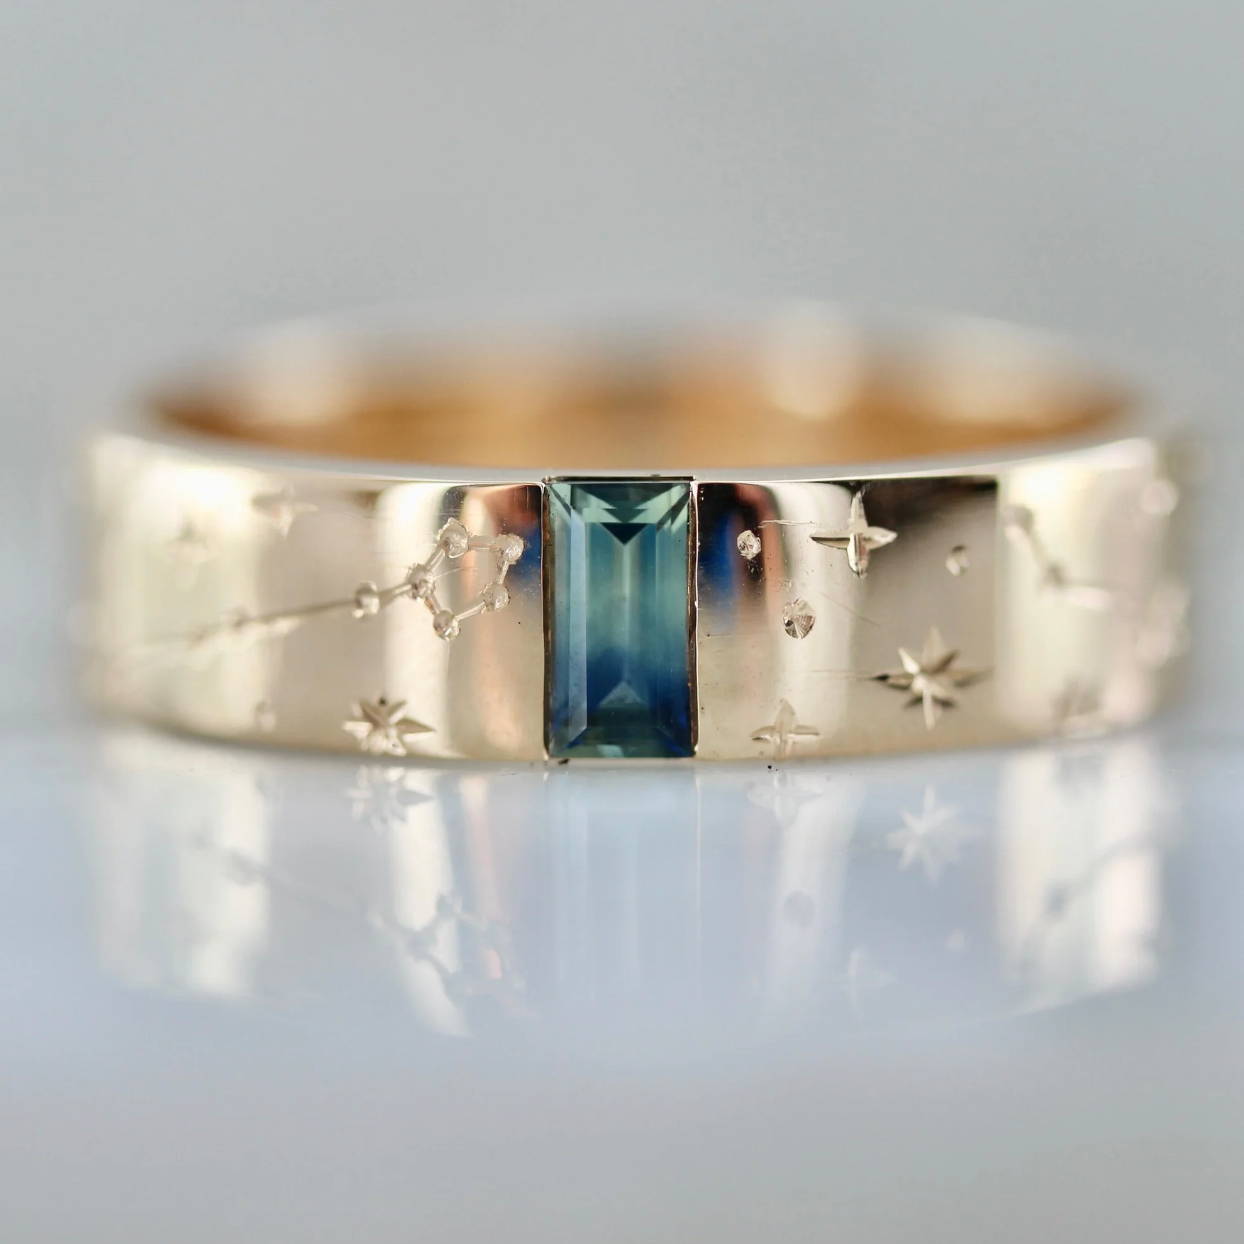 green sapphire band with star and constellation engraving